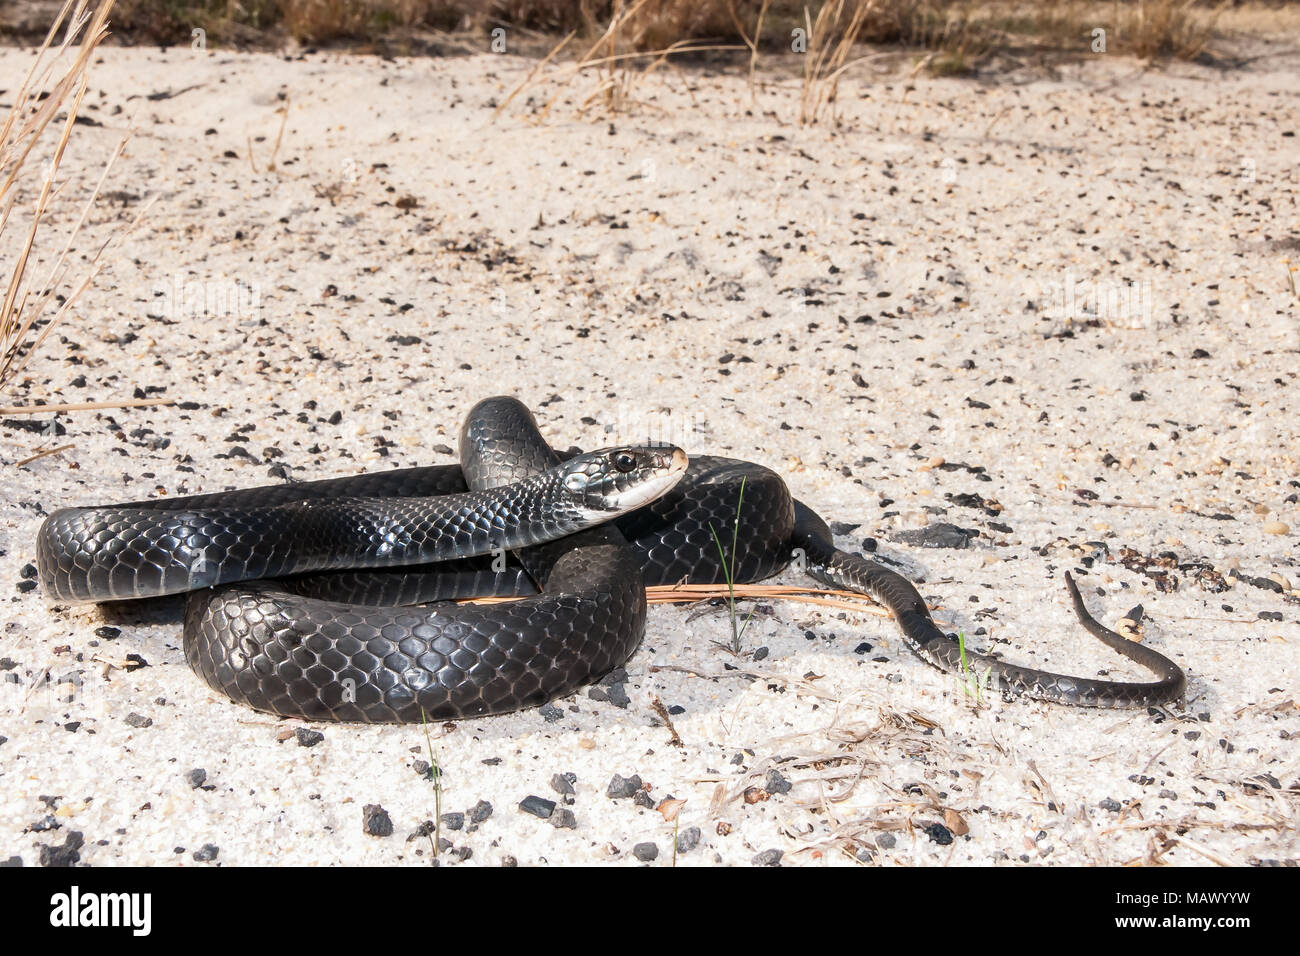 Southern Black Racer (Coluber constrictor priapus) Stock Photo